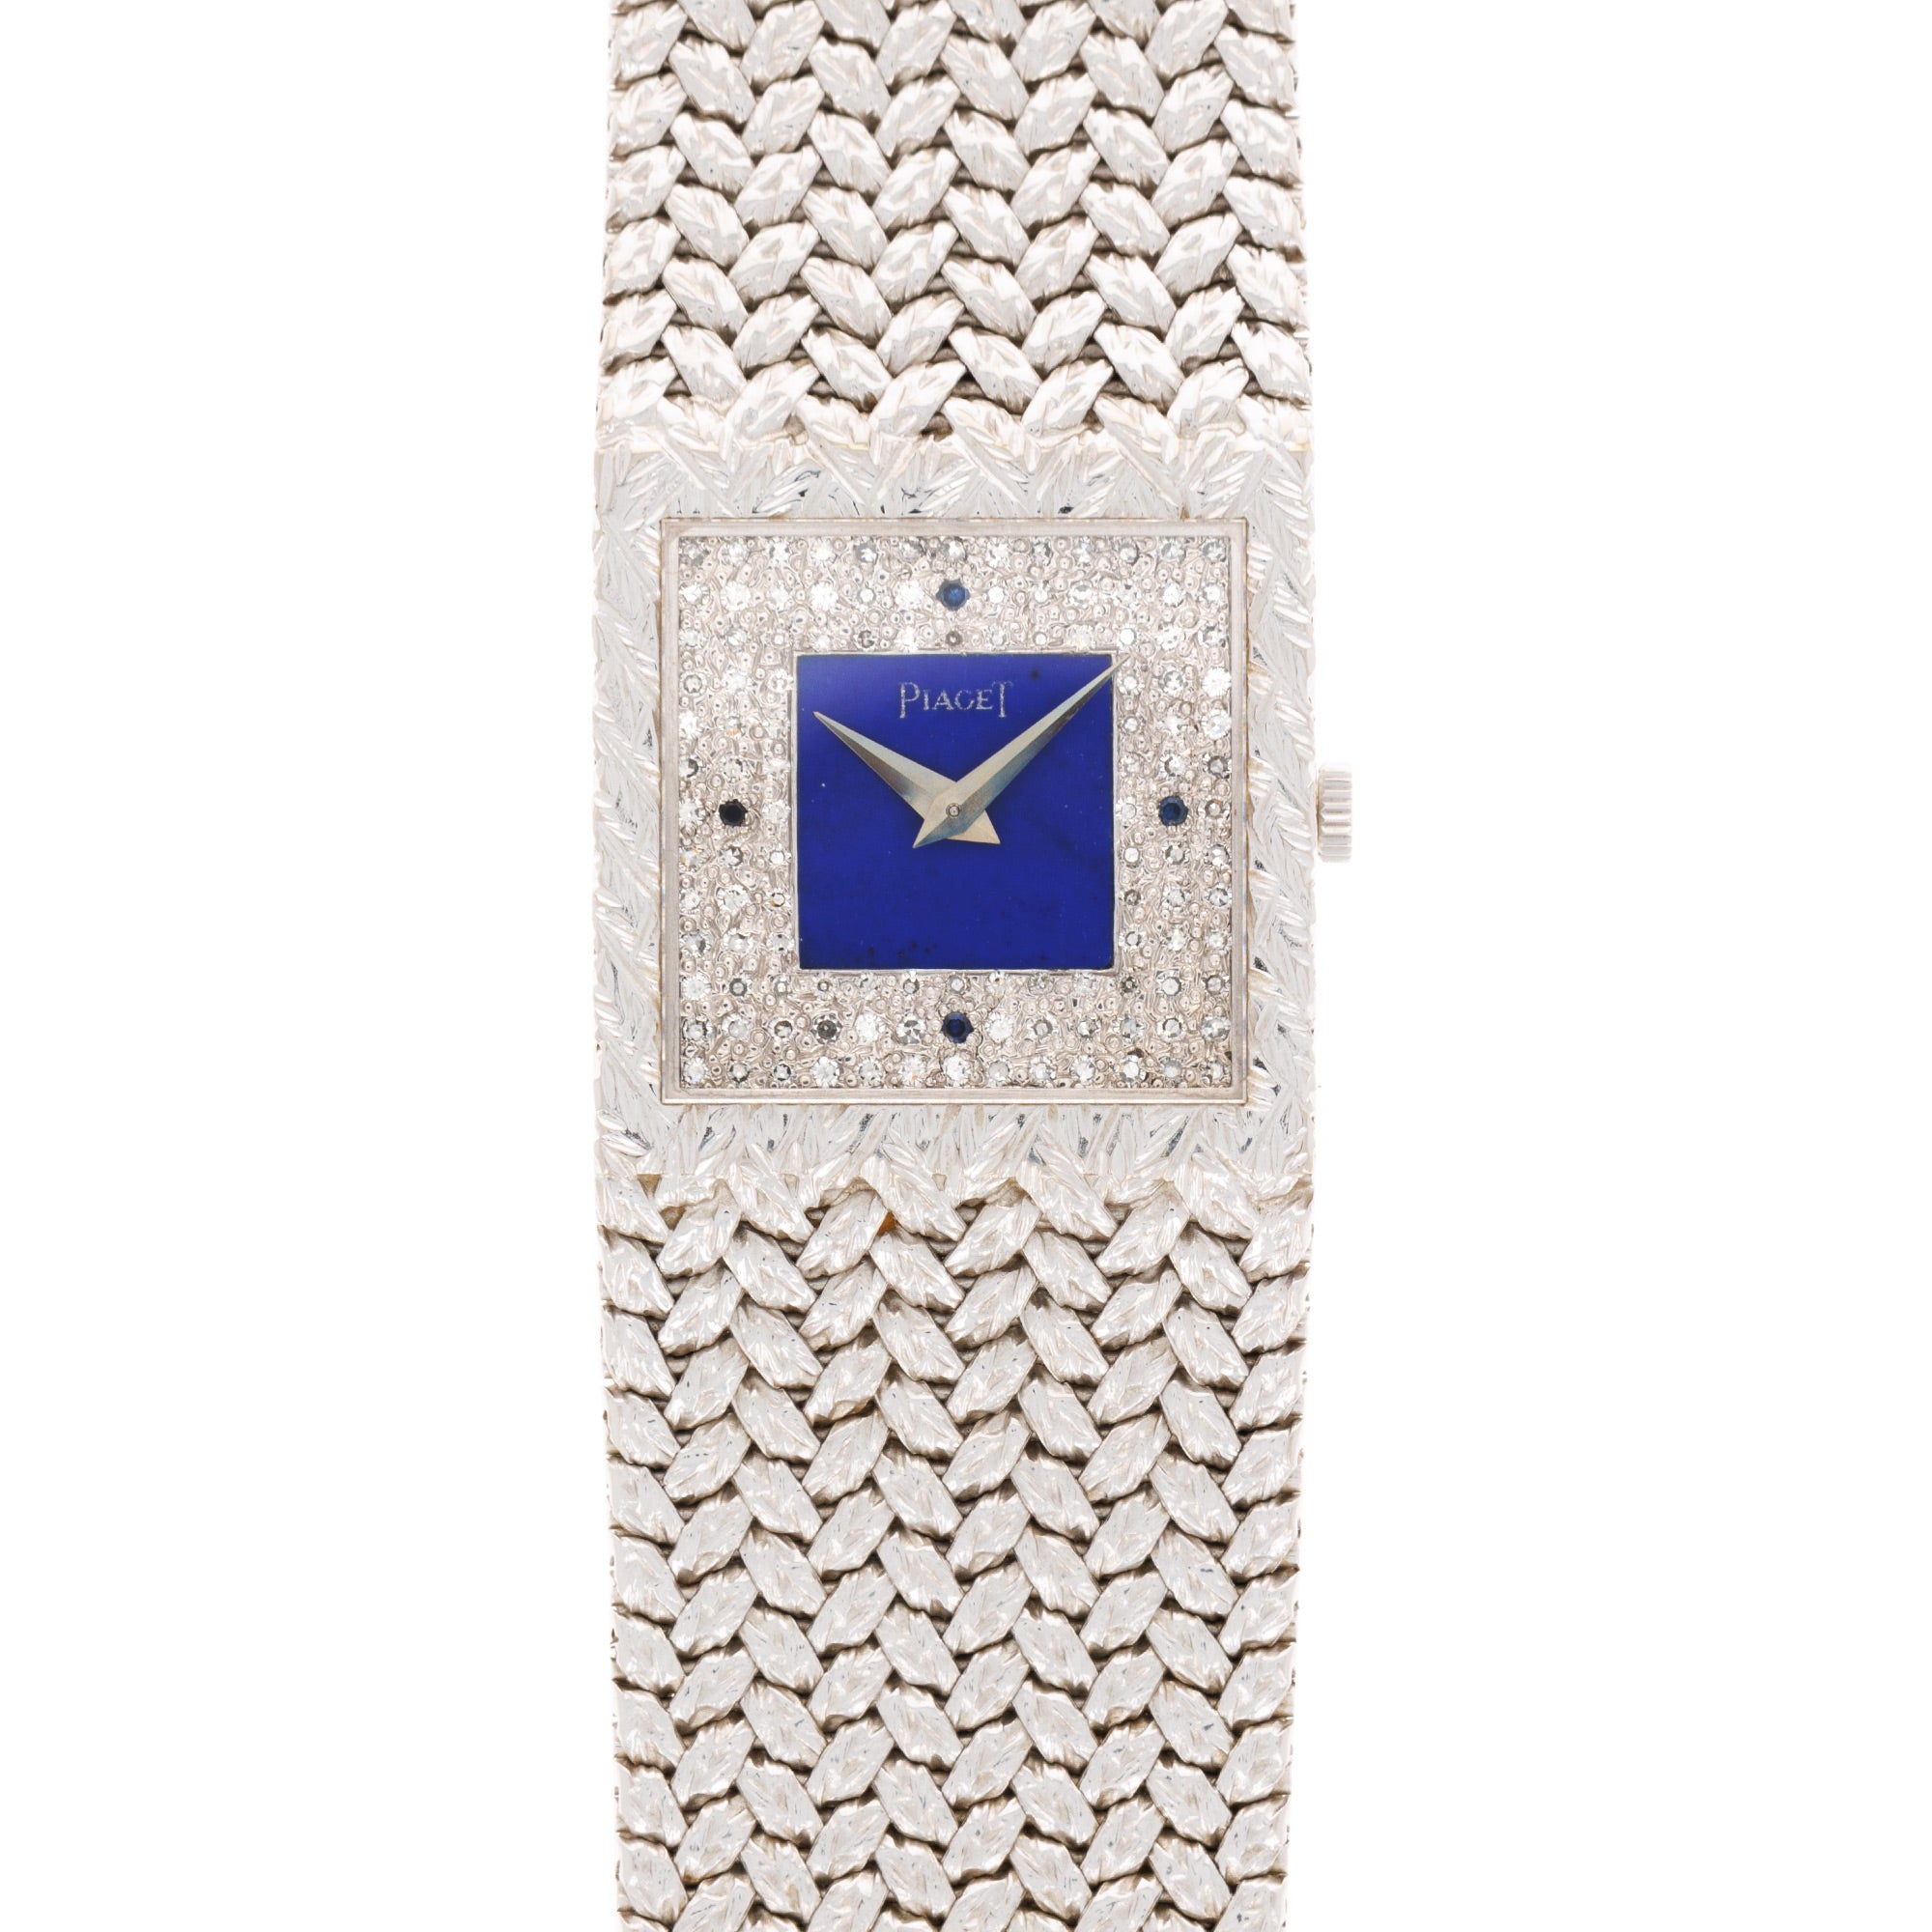 Piaget - Piaget White Gold Lapis and Diamond Watch Ref. 9352D2 - The Keystone Watches